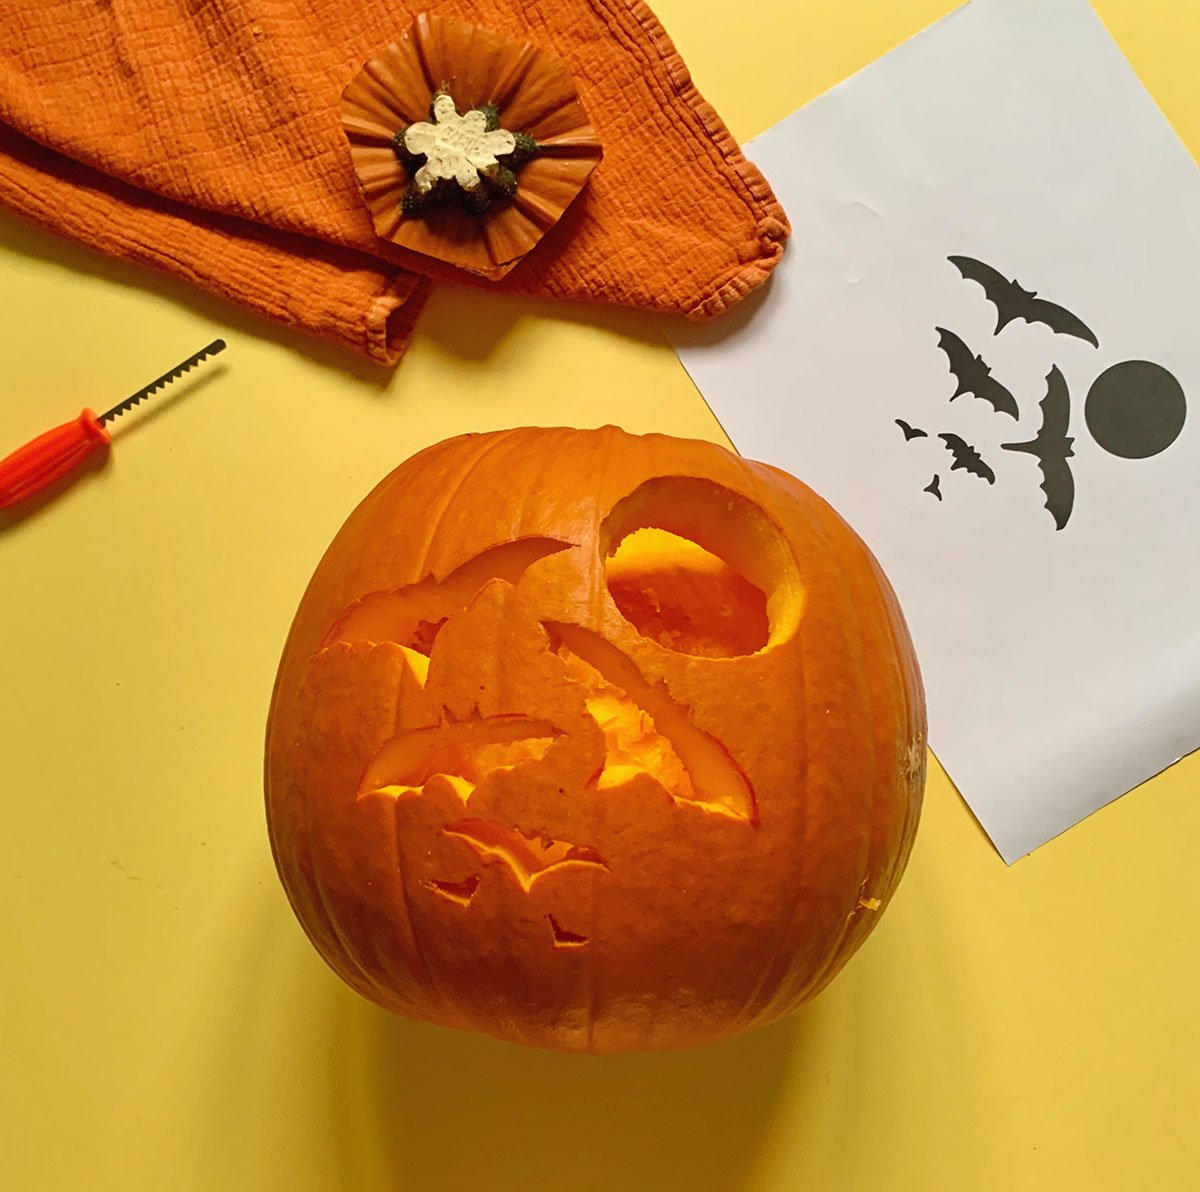 A photo of a pumpkin with the stencil carved into it